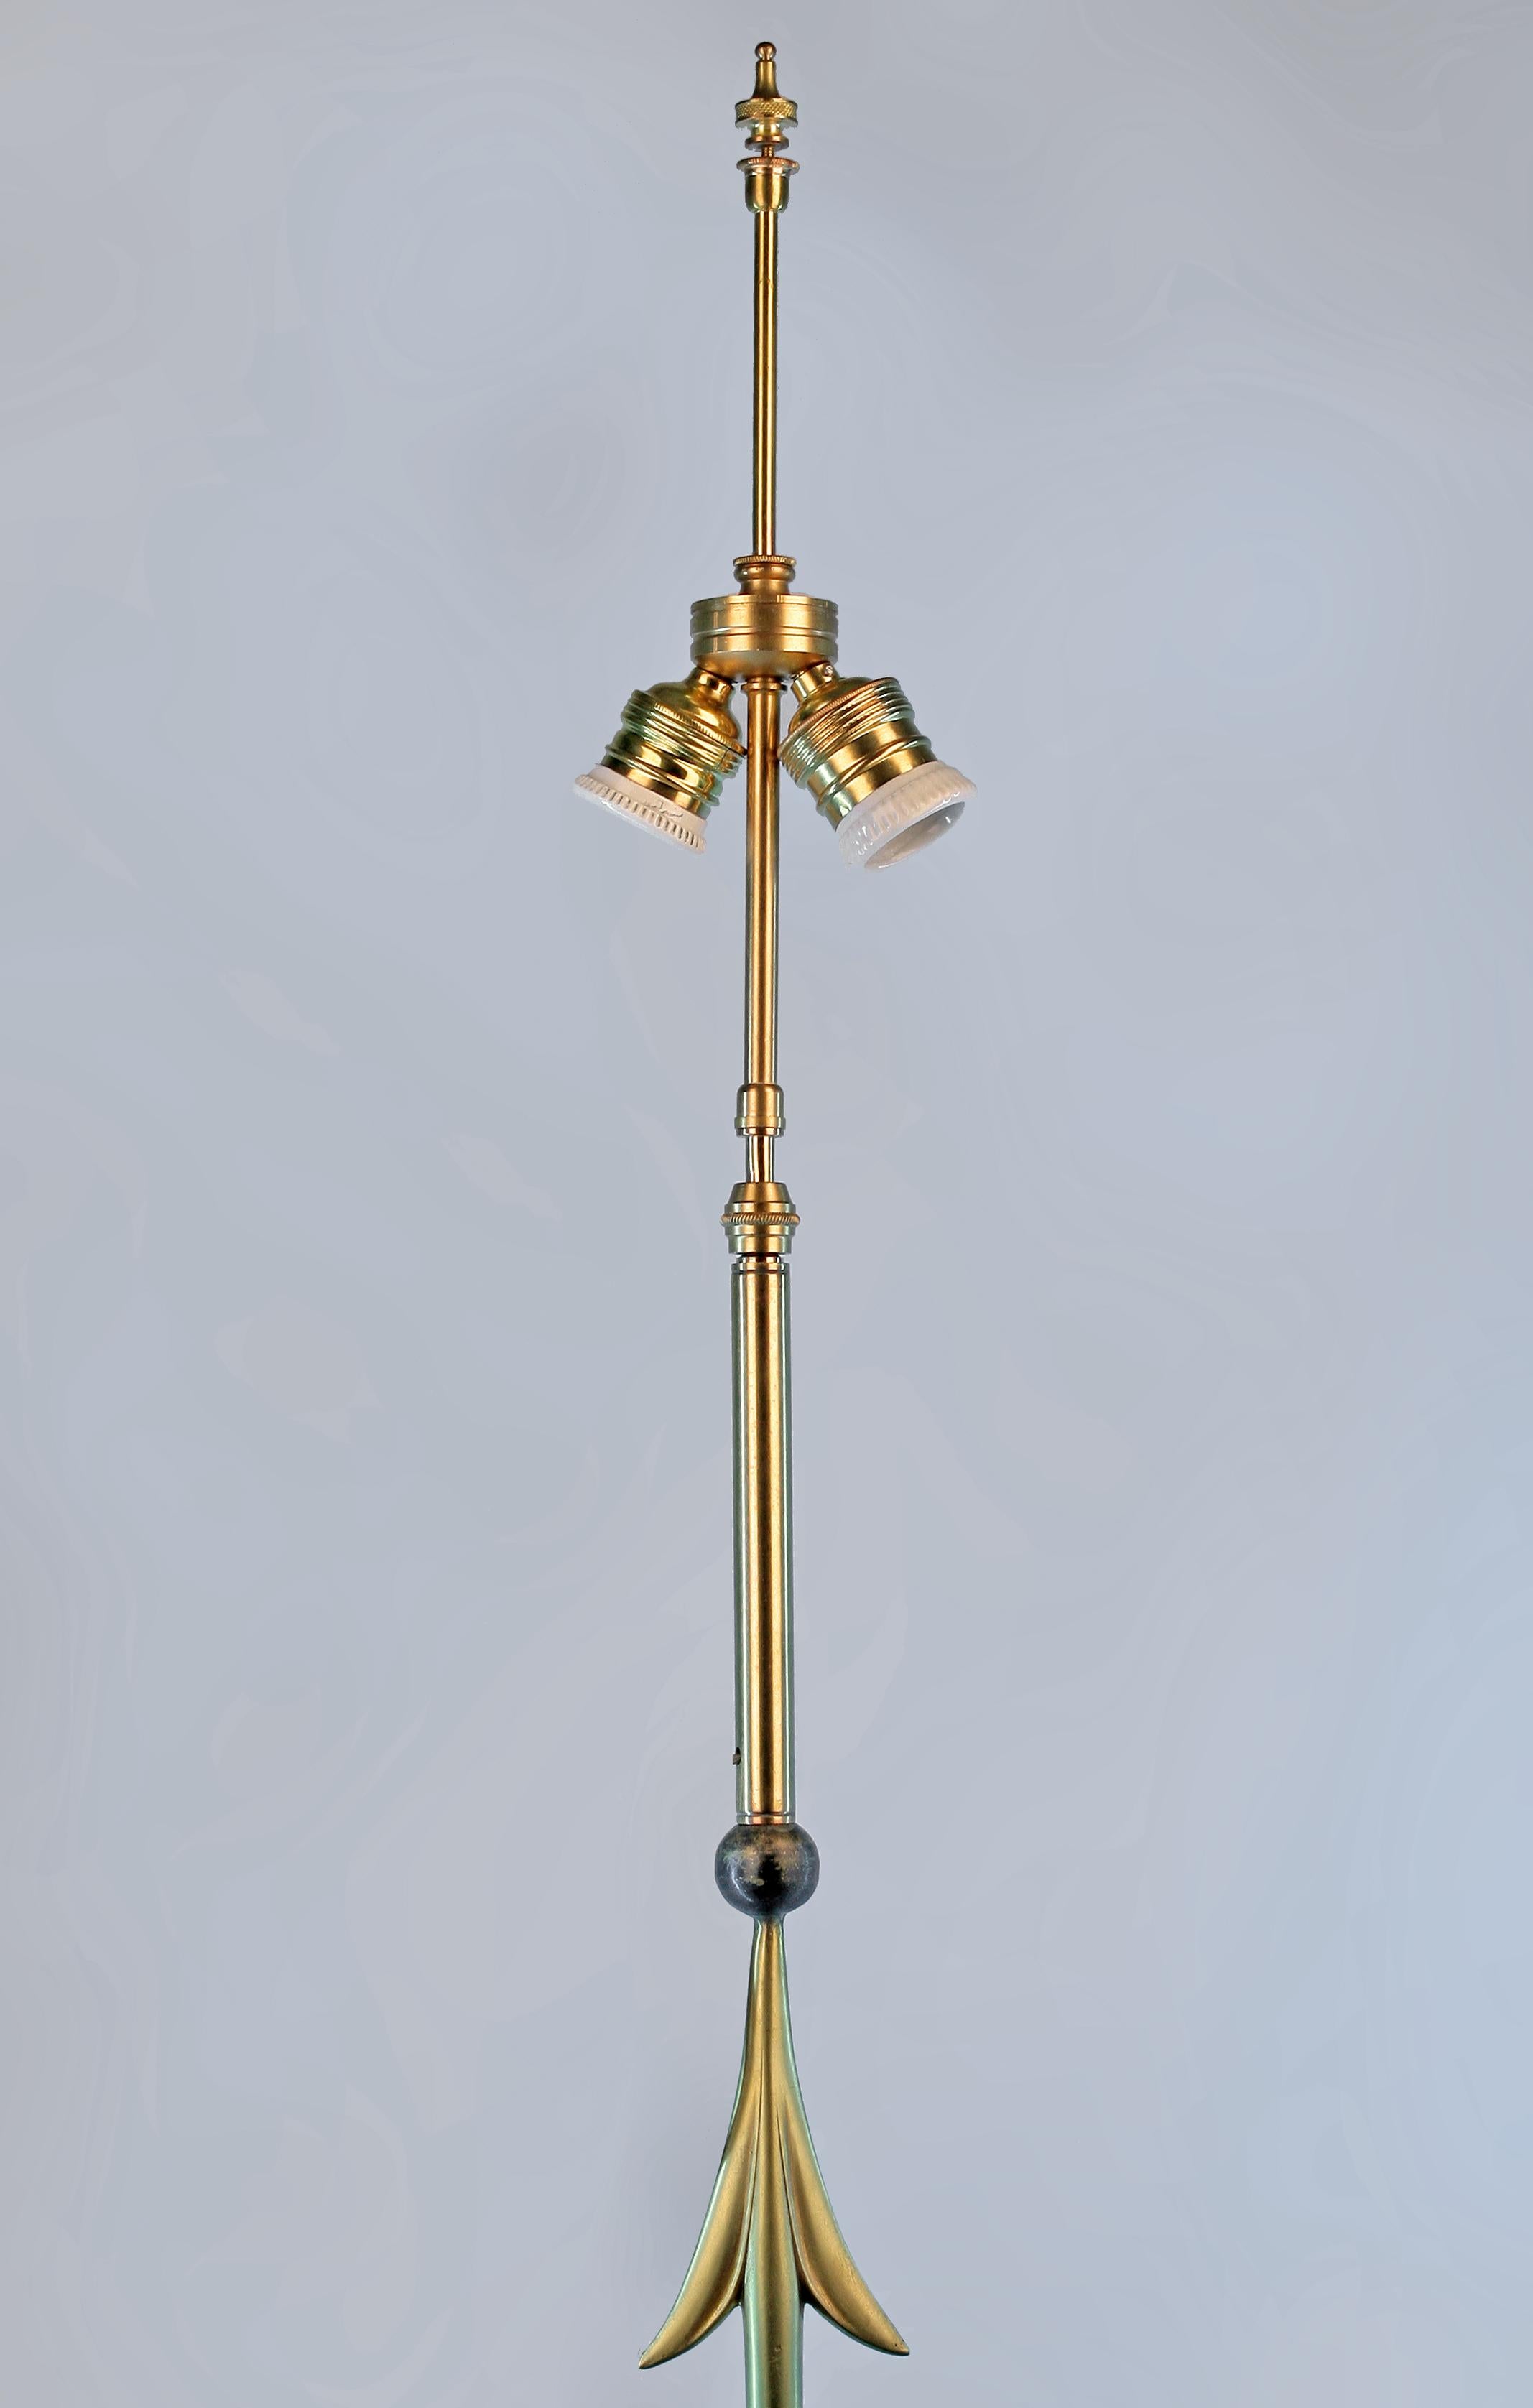 Empire Revival Late 19th C. French Ormolu/Gilt Bronze Arrow-Shaped Floor Lamp by Maison Jansen For Sale